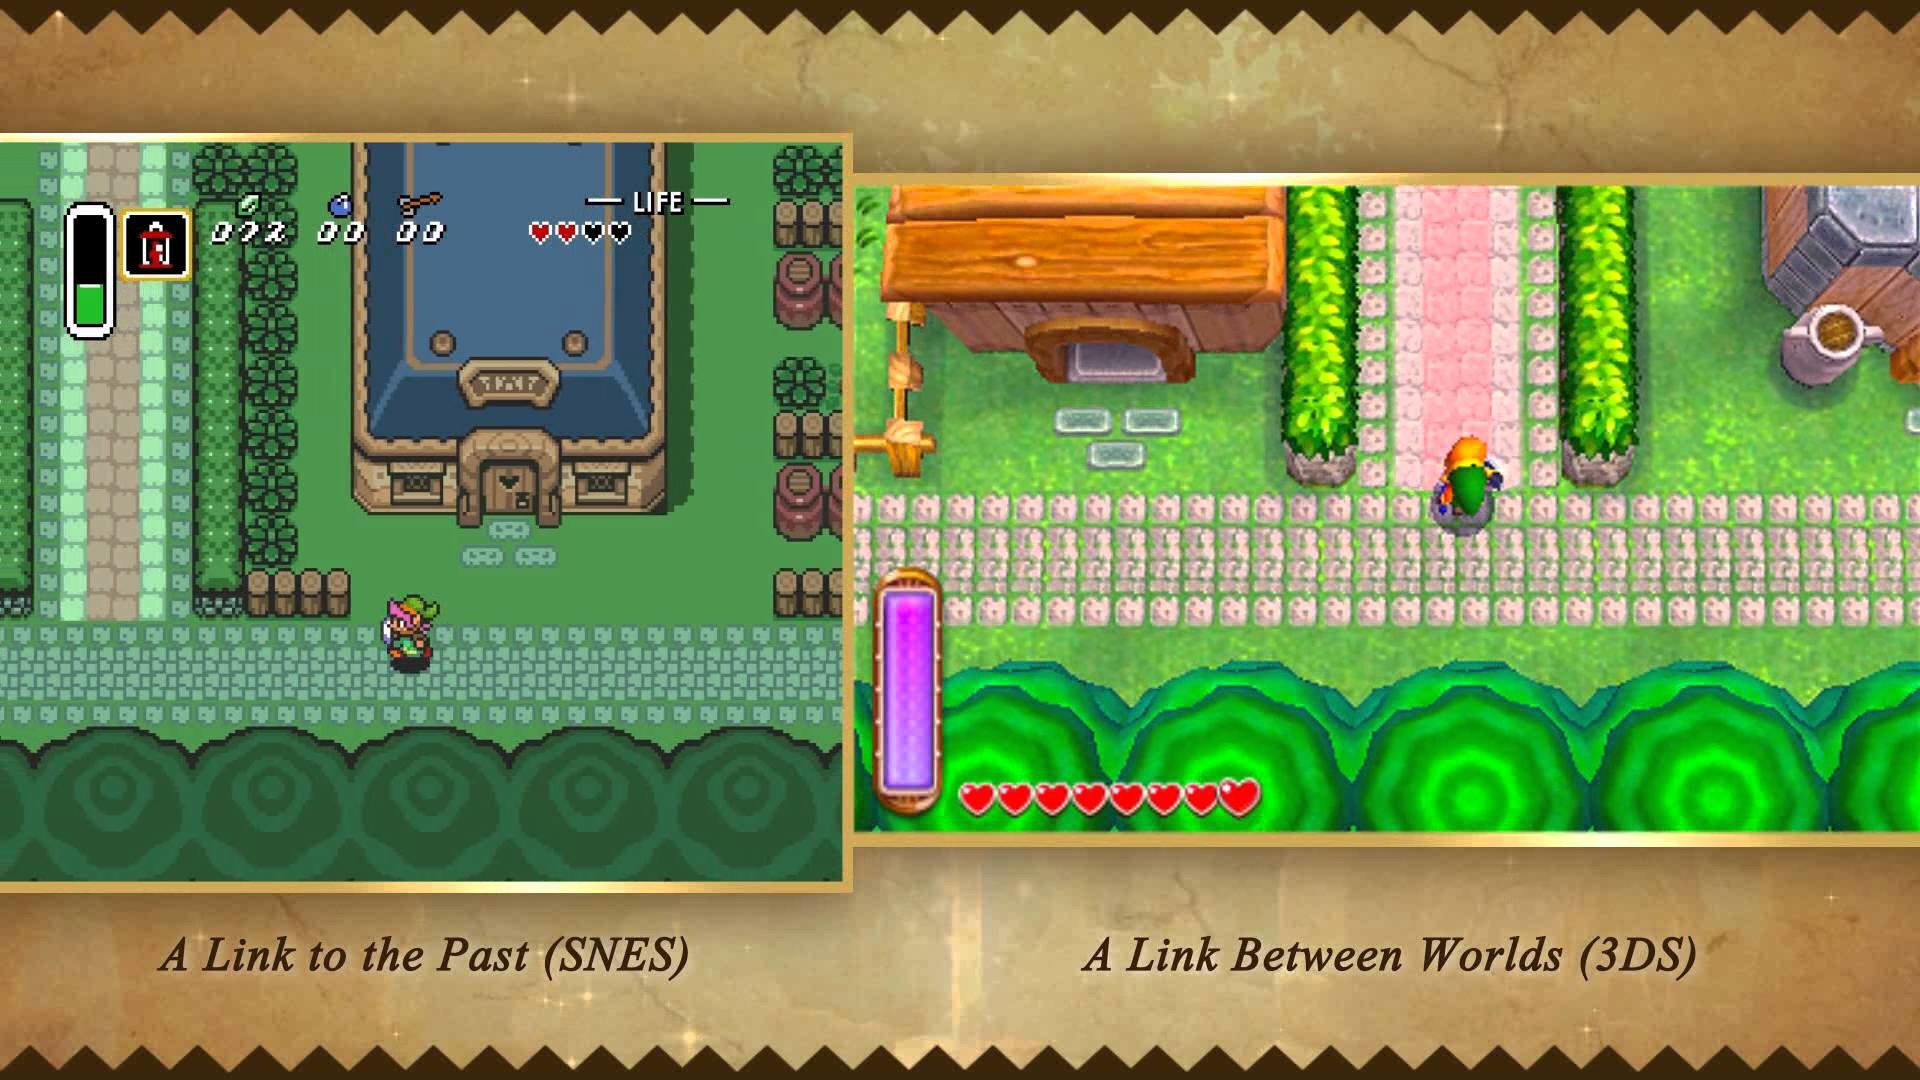 The world of the past be. The Legend of Zelda a link to the past Snes. The Legend of Zelda: a link to the past 1991. Legend of Zelda Snes. Nintendo 3ds the Legend of Zelda: a link to the past.